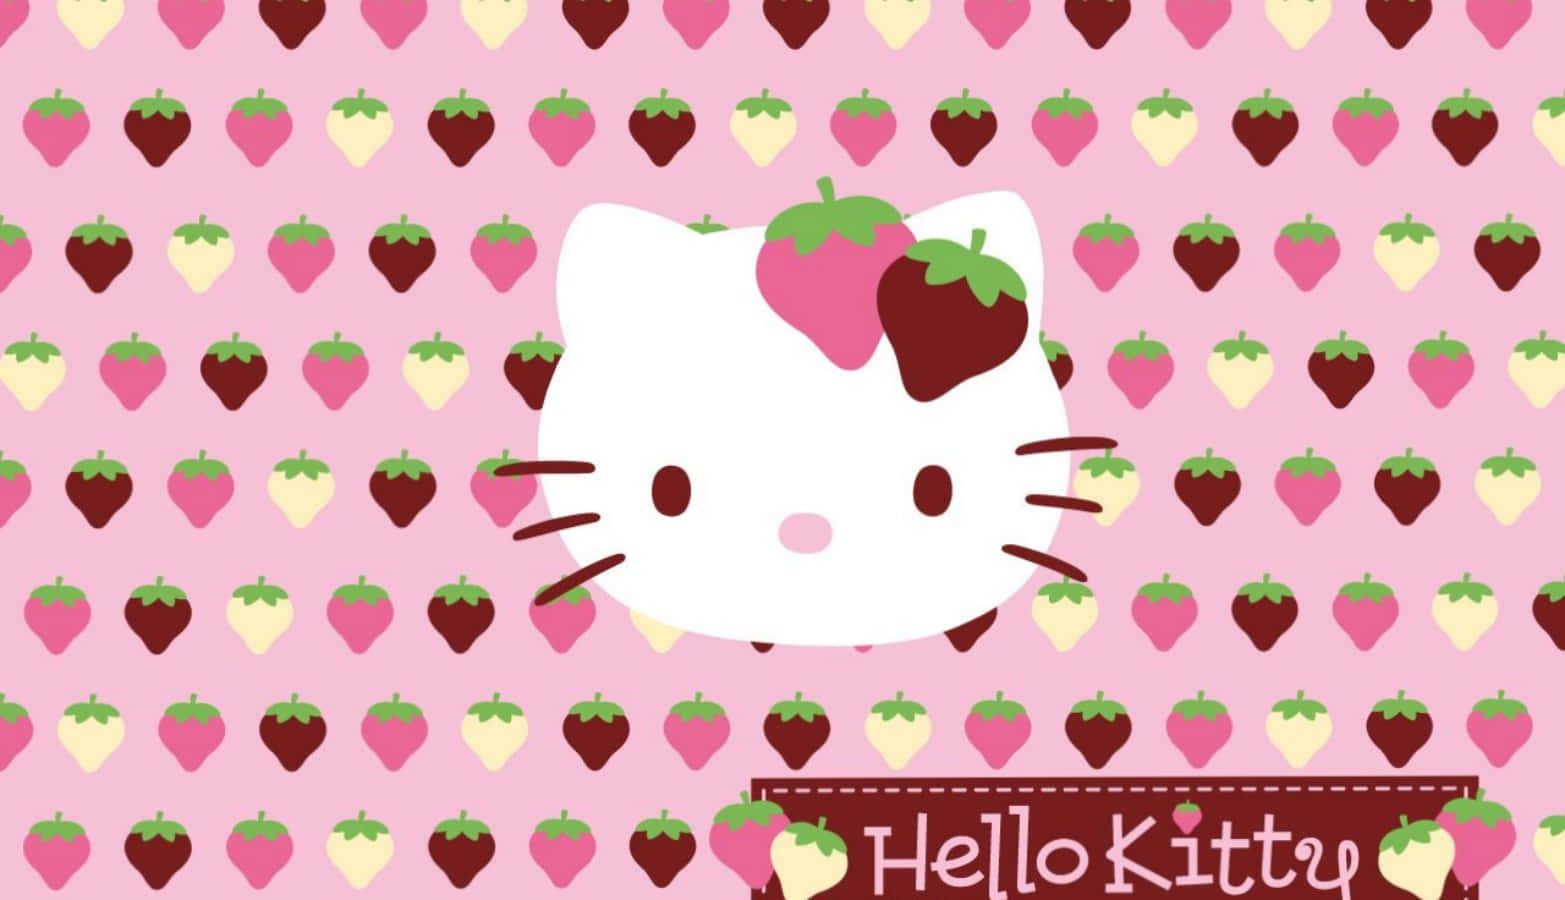 Get Ready for School with a Fun&Functional Hello Kitty Laptop Wallpaper